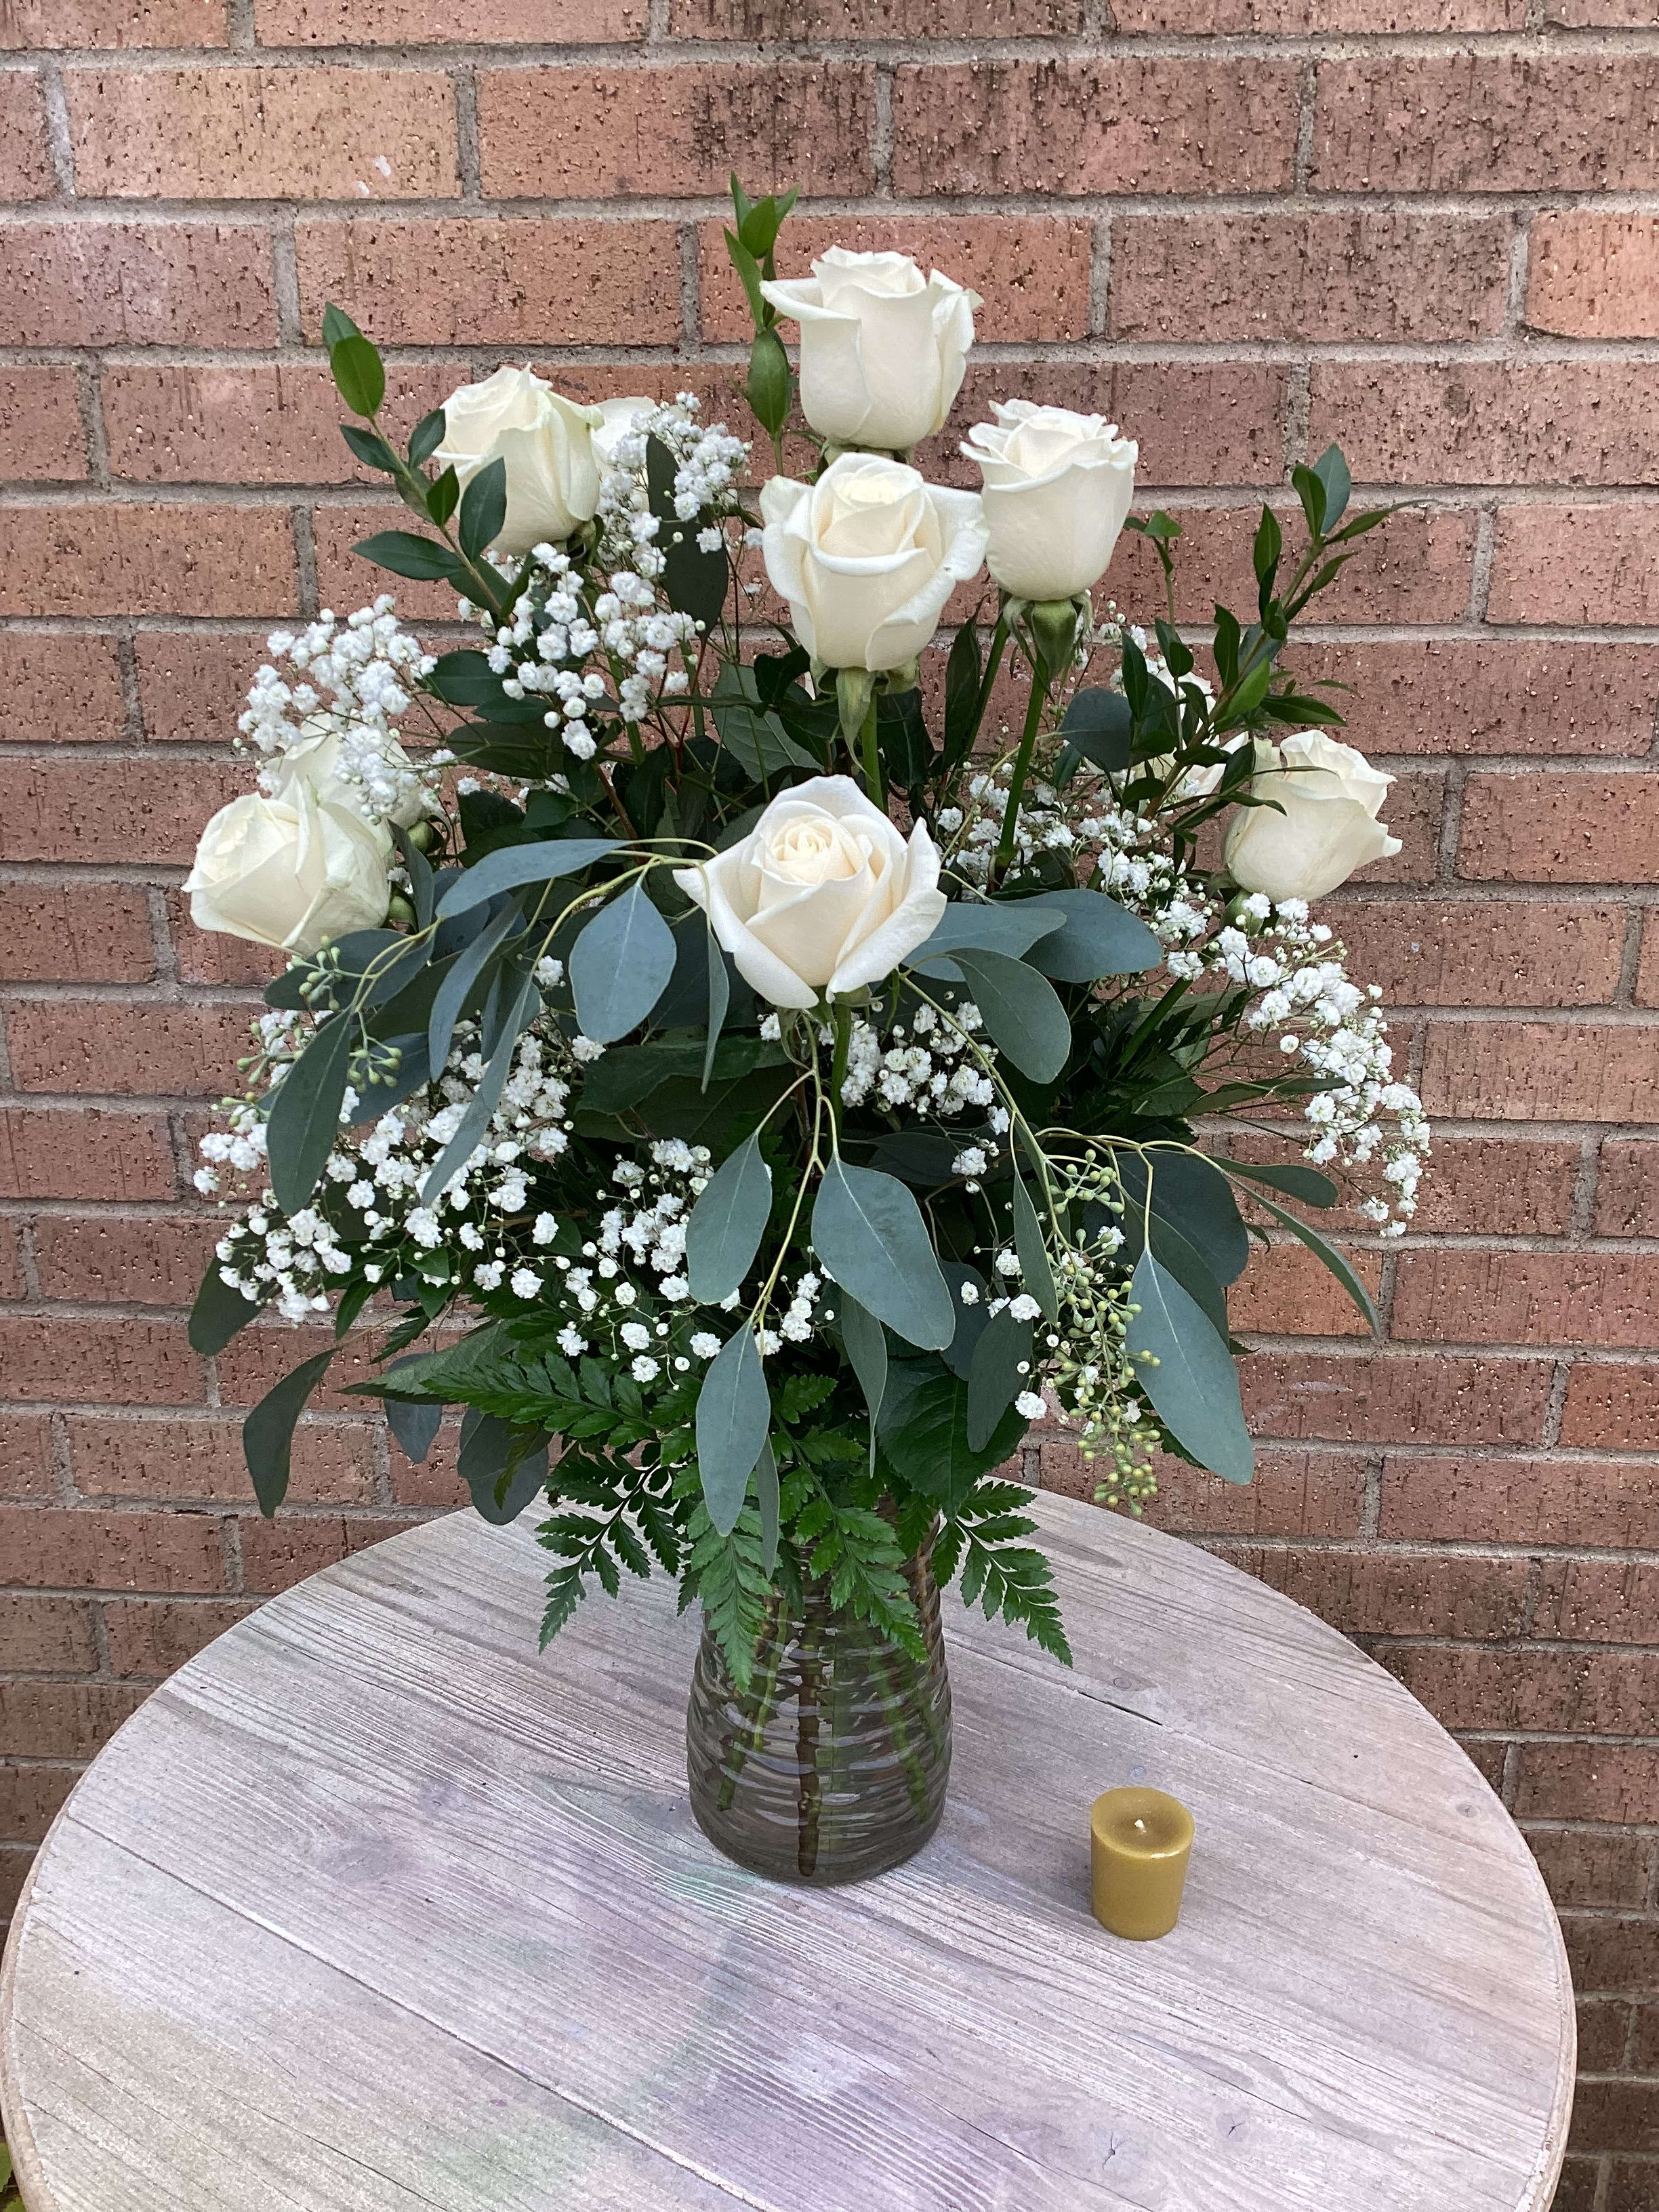 Deluxe White Roses - All White Roses with Babies Breath and Mixed Greenery.